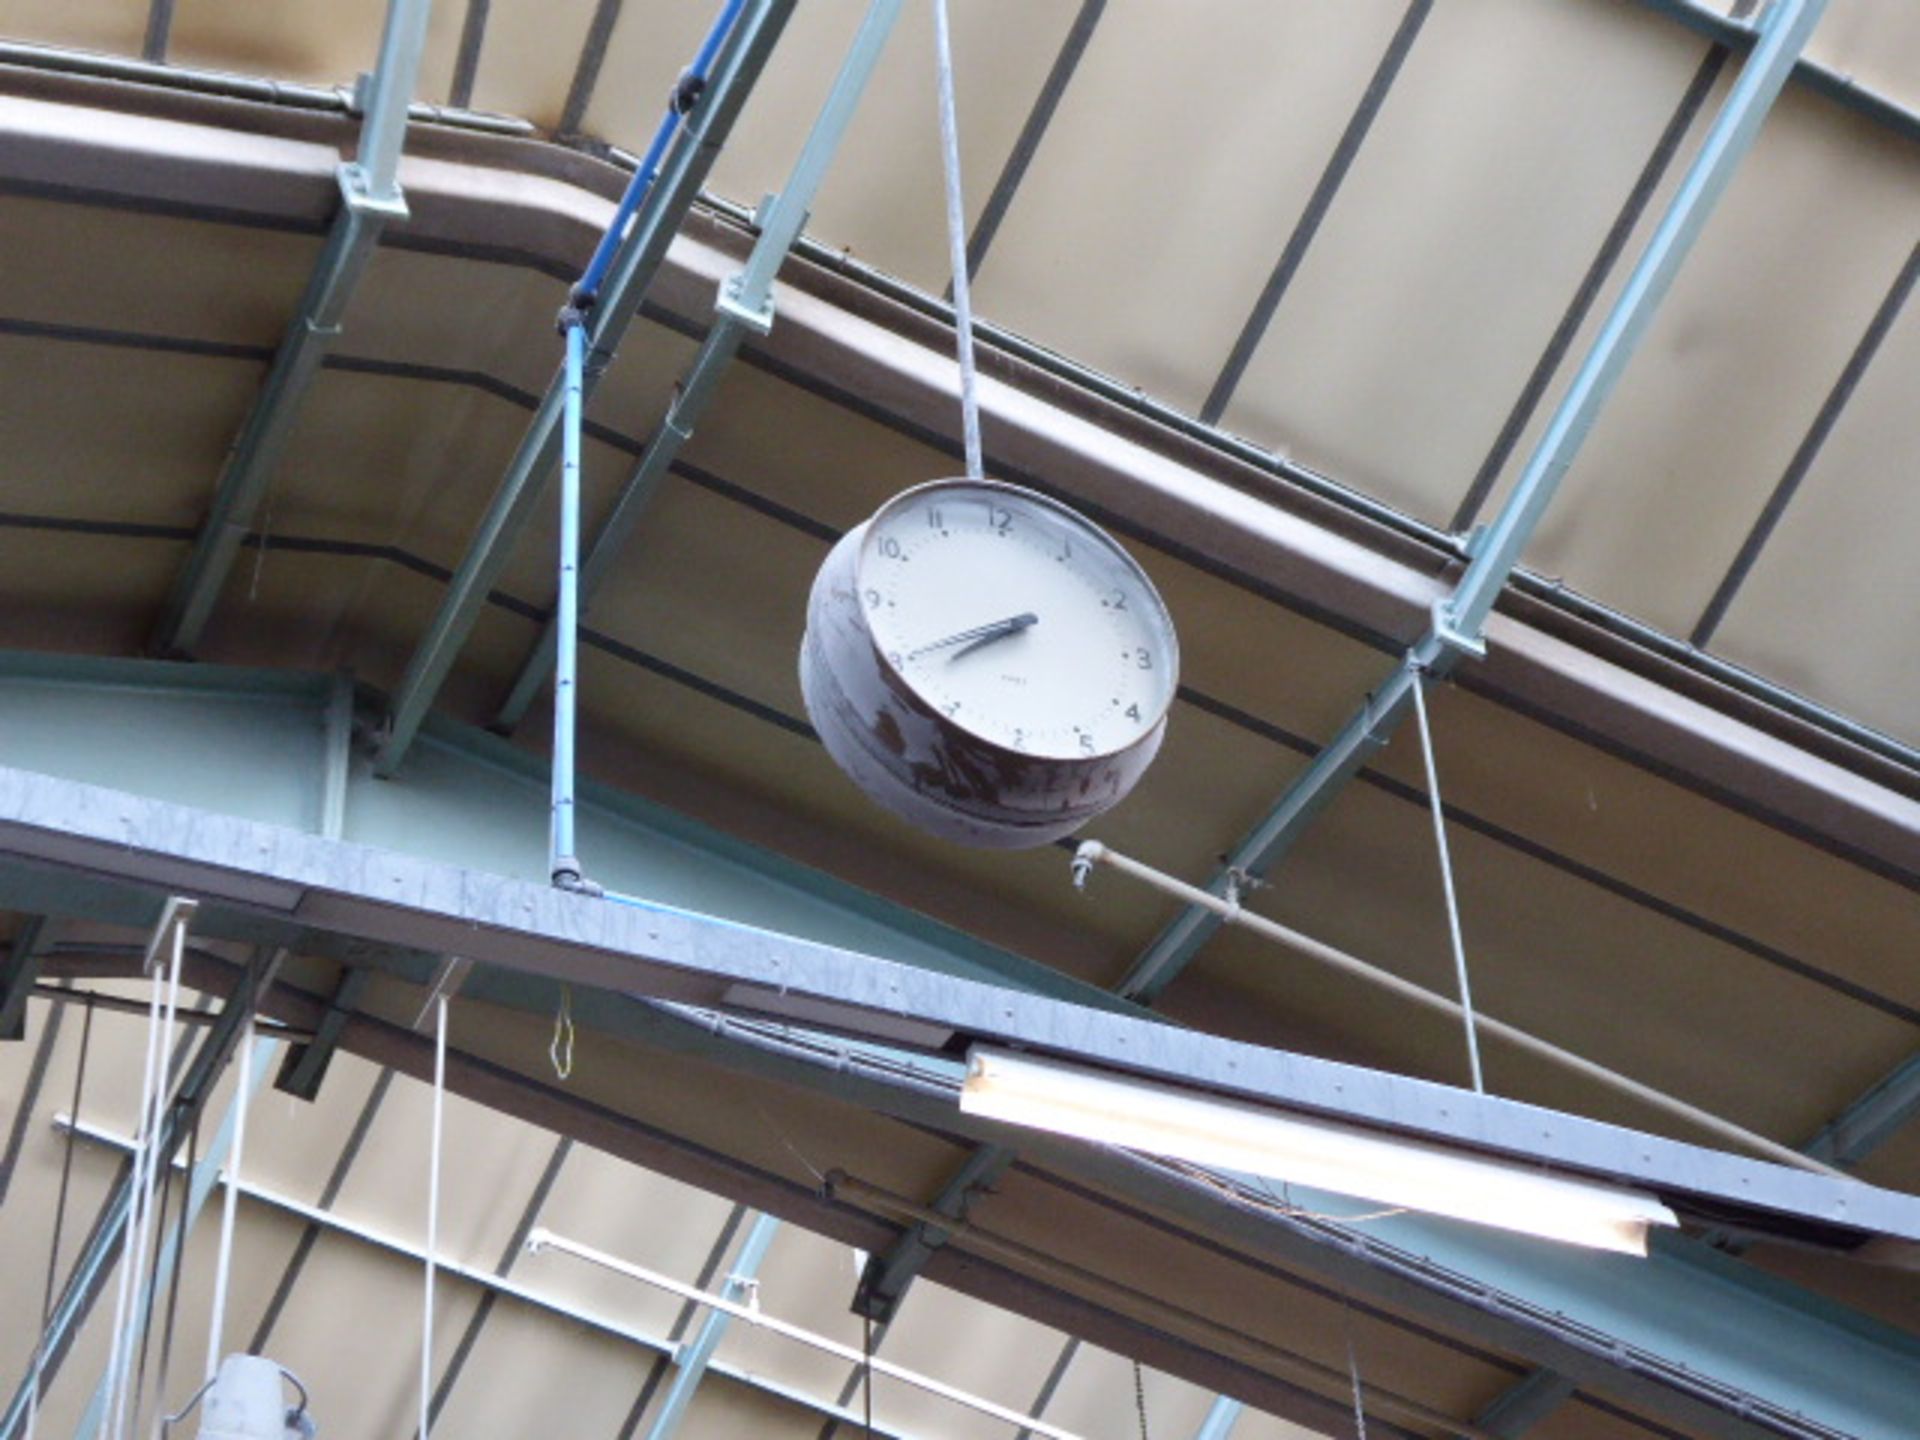 Gent double sided ceiling mounted factory clock together with a similar wall mounted clock - Image 4 of 8